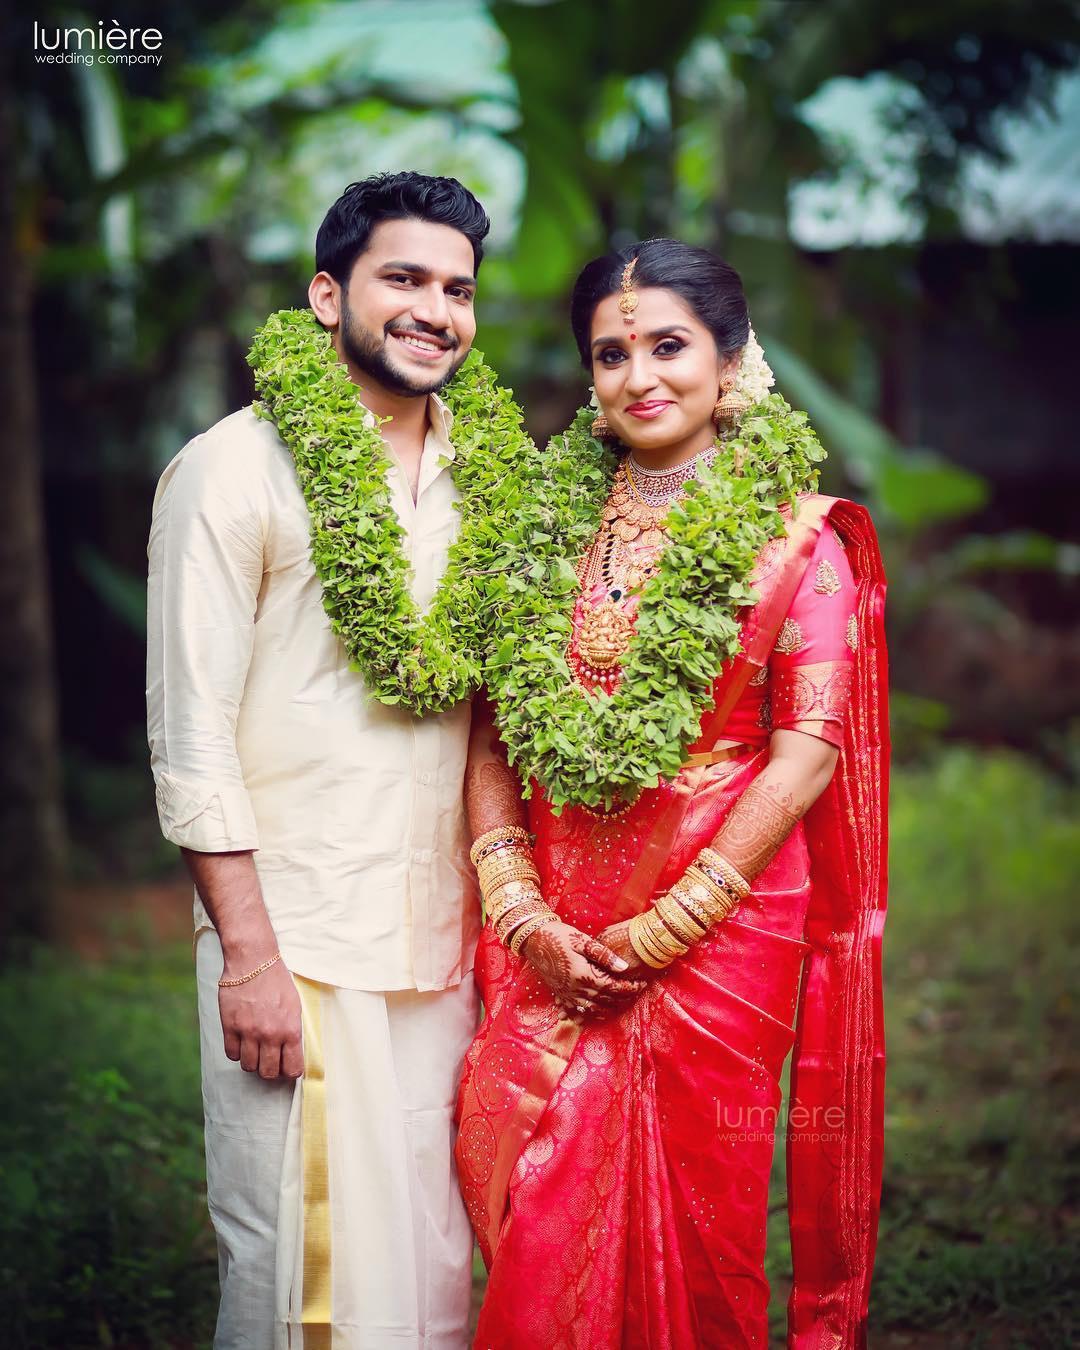 10 Kerala Saree Images That Prove This Outfit is the Ideal One